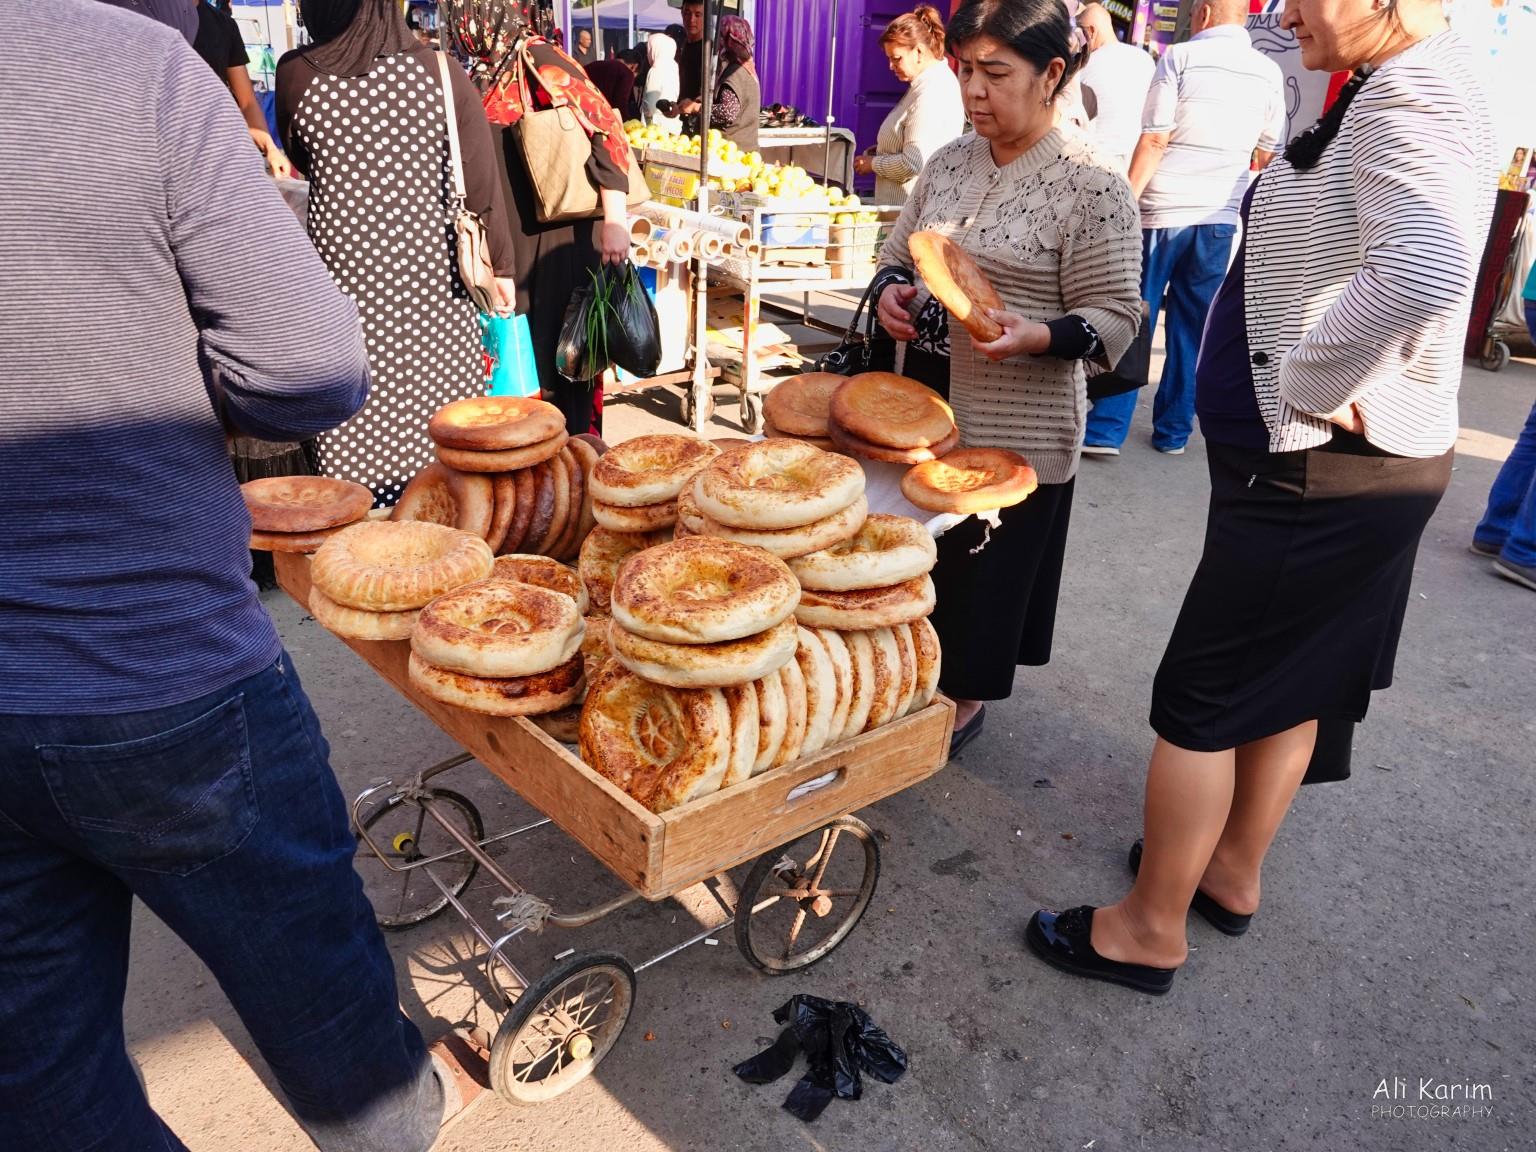 Tashkent, Oct 2019, Bread on prams was always available everywhere in Central Asia